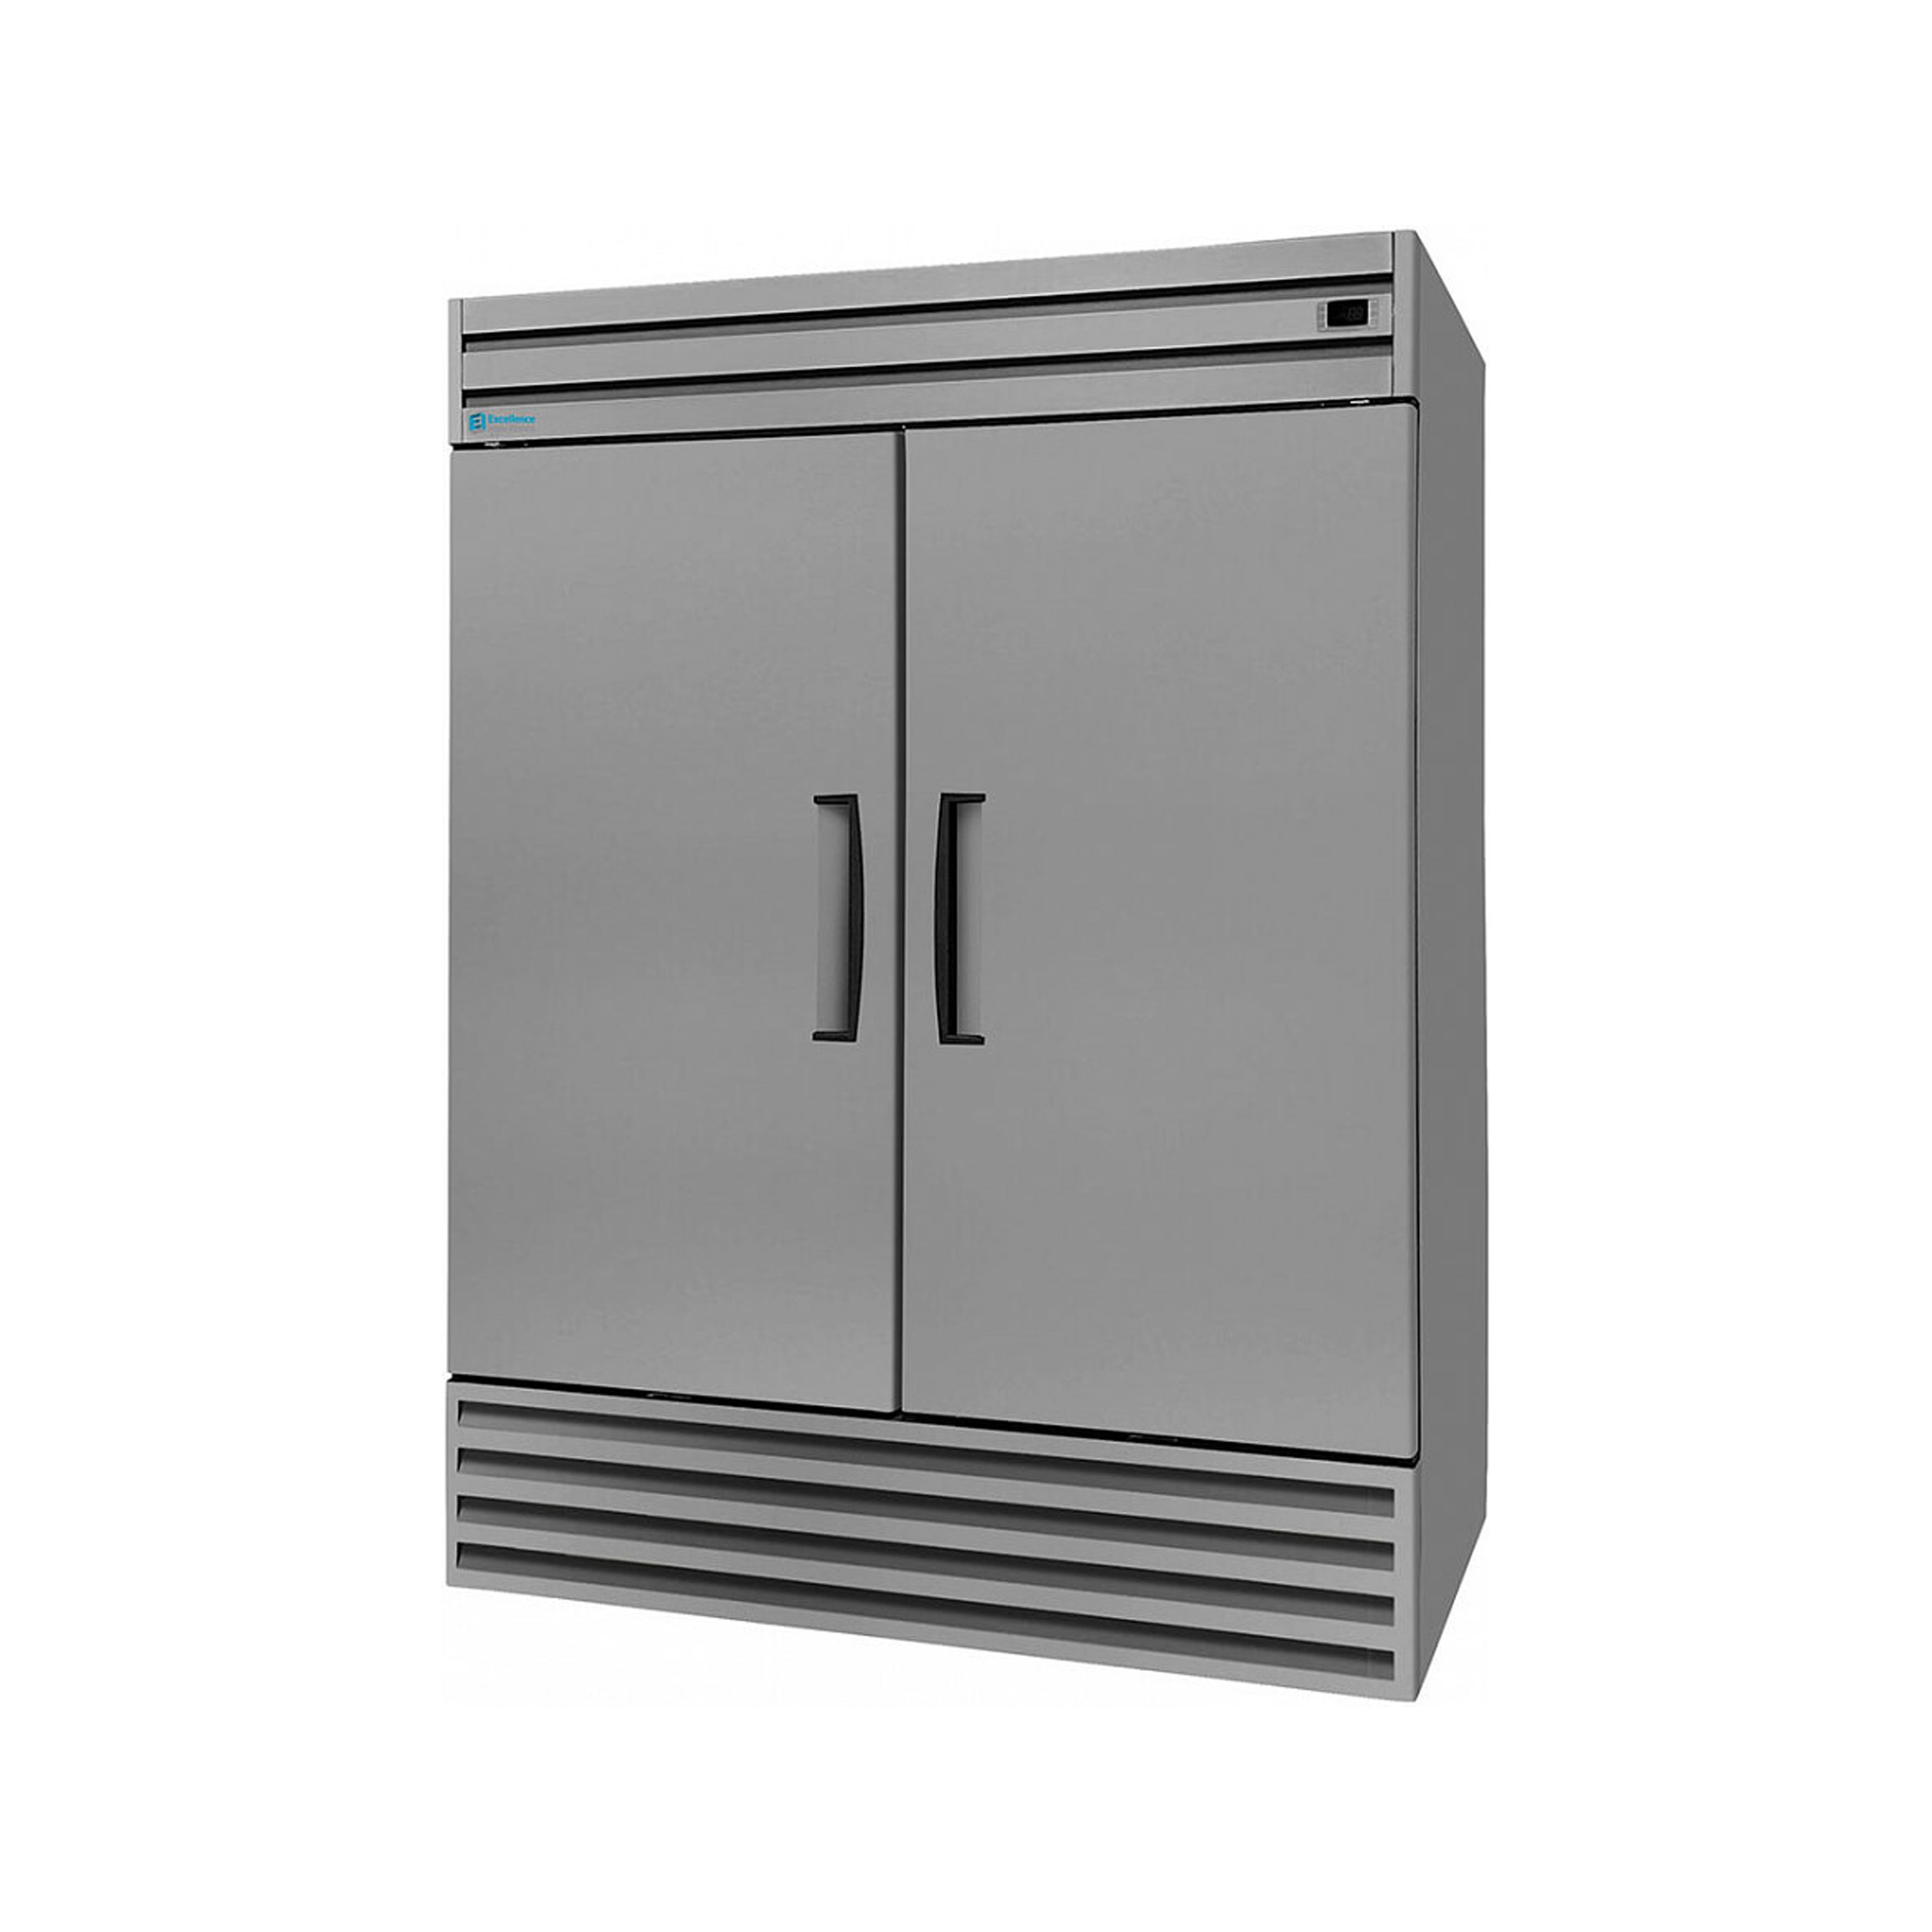 Excellence Industries - CF-43SSHC, 54" Commercial Reach-In 2 Solid Door Refrigerator 43 cu.ft.